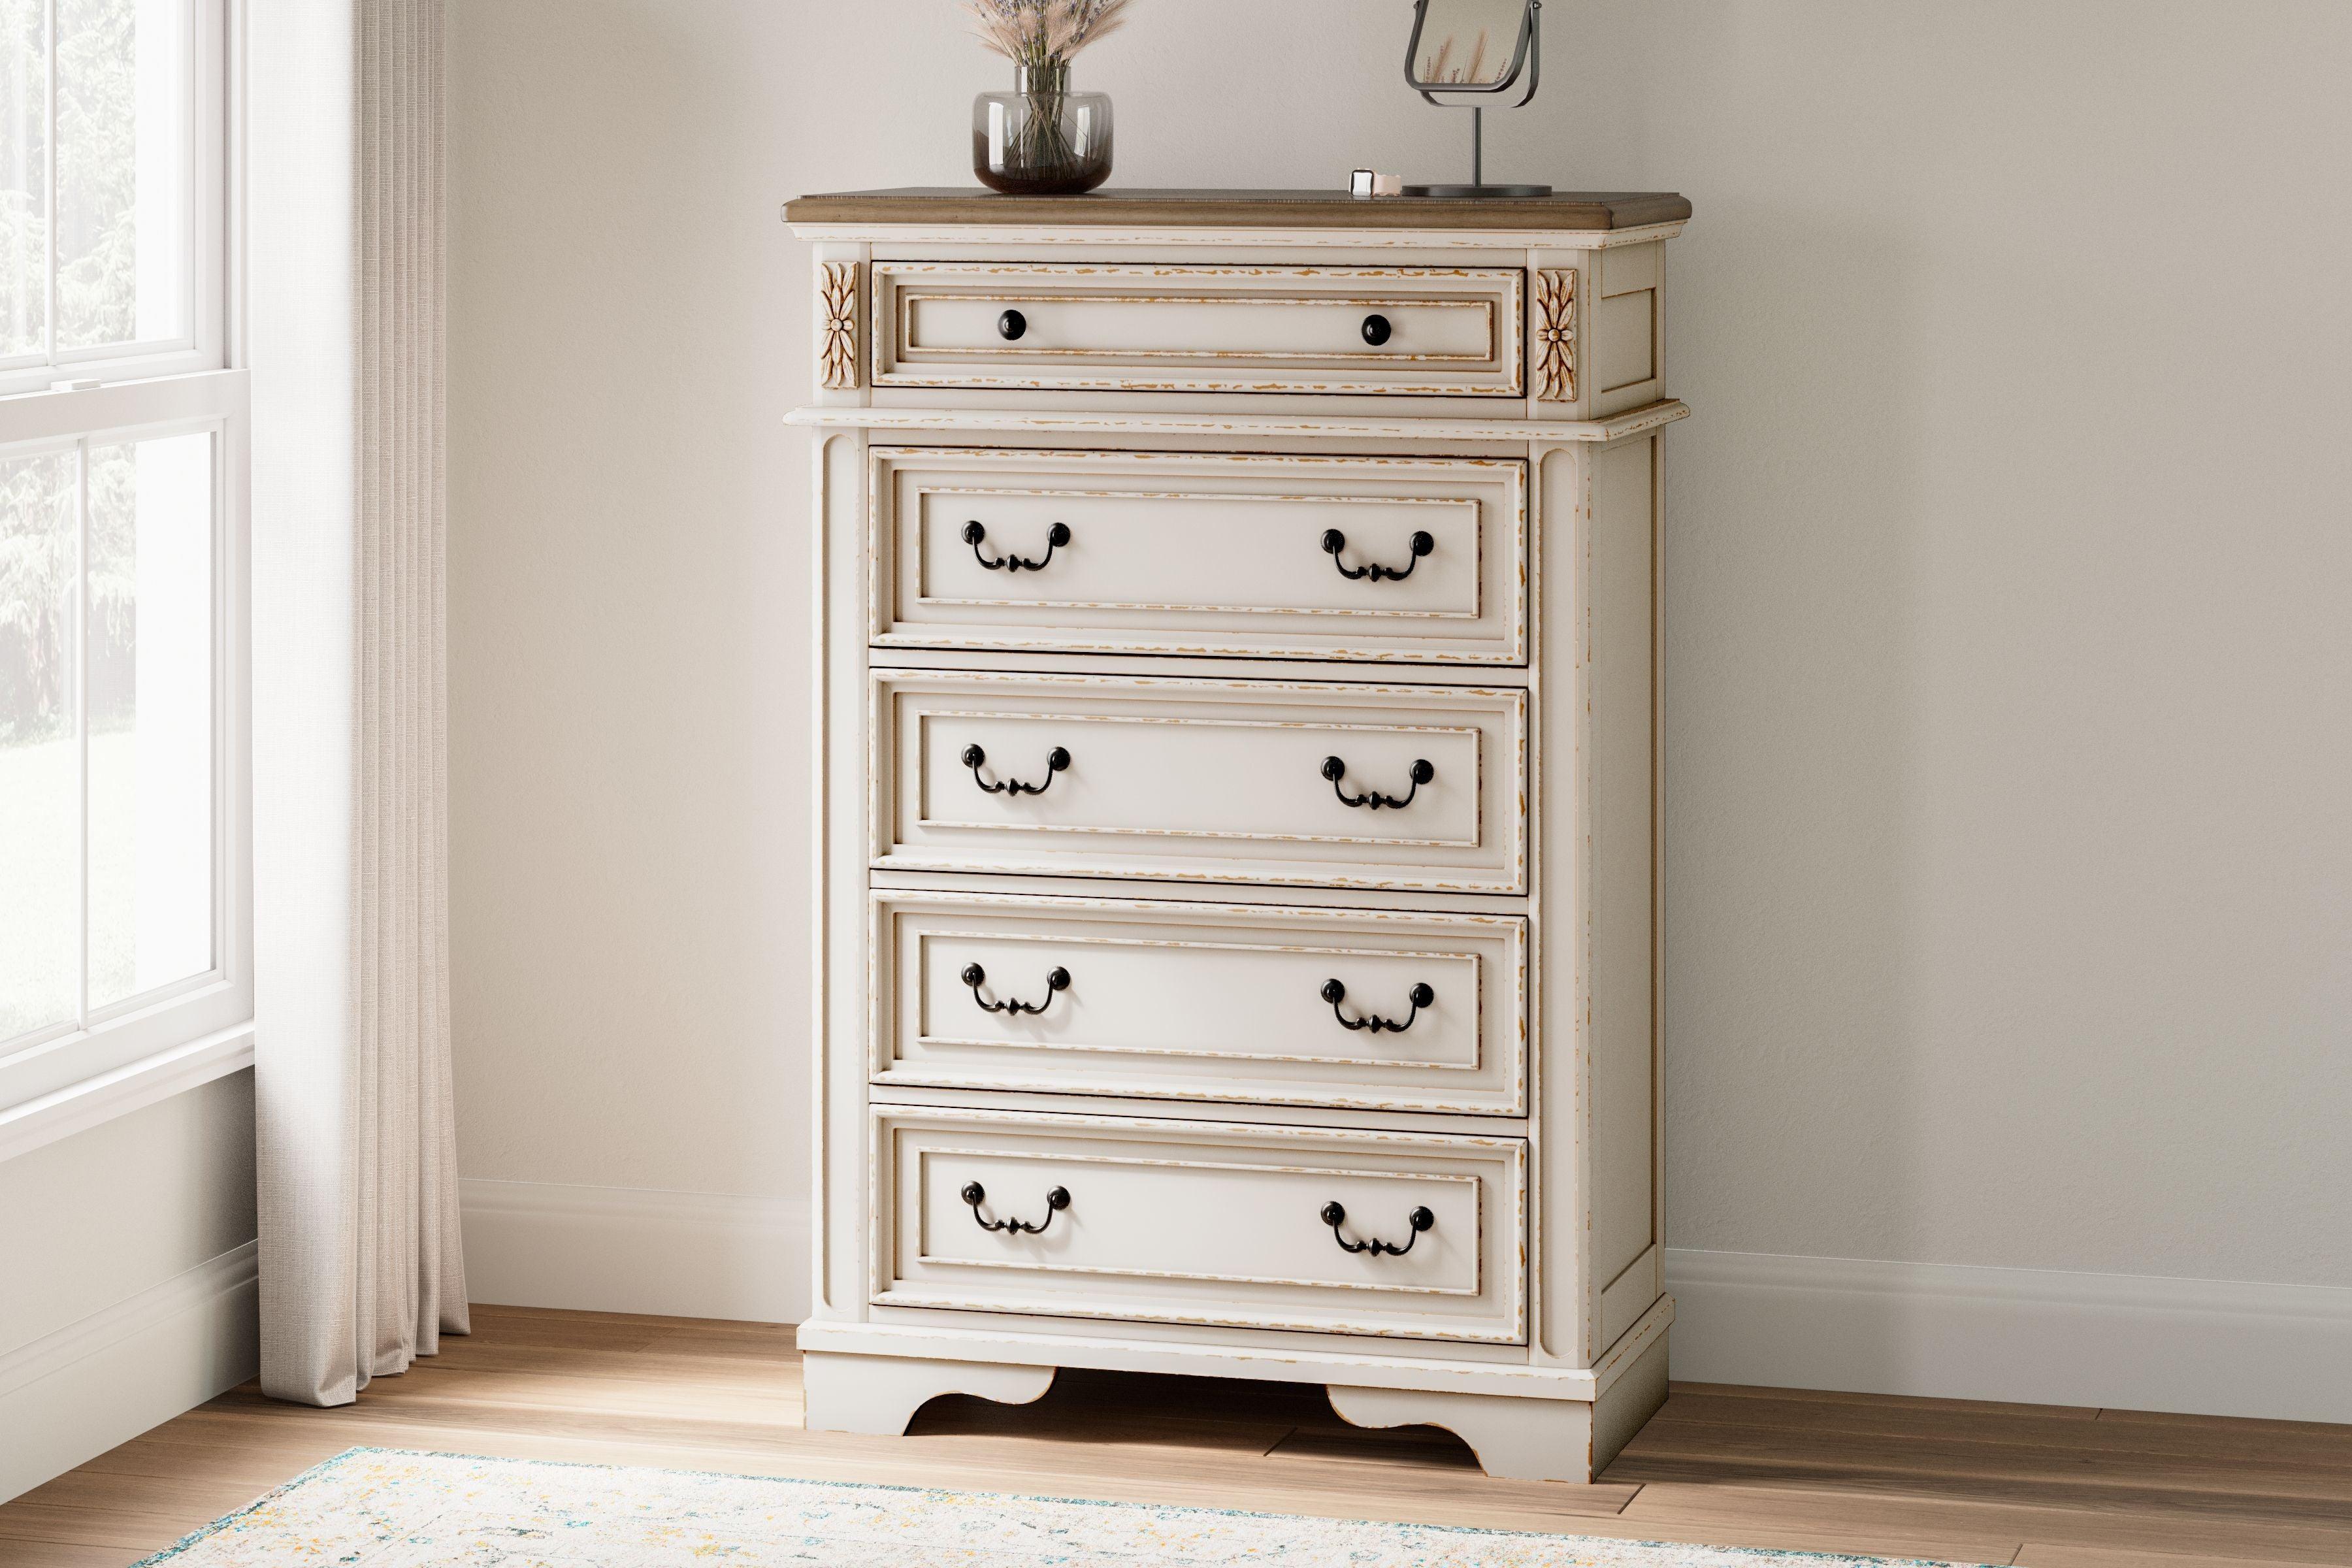 Ashley Furniture - Realyn - White / Brown / Beige - Five Drawer Chest - 5th Avenue Furniture